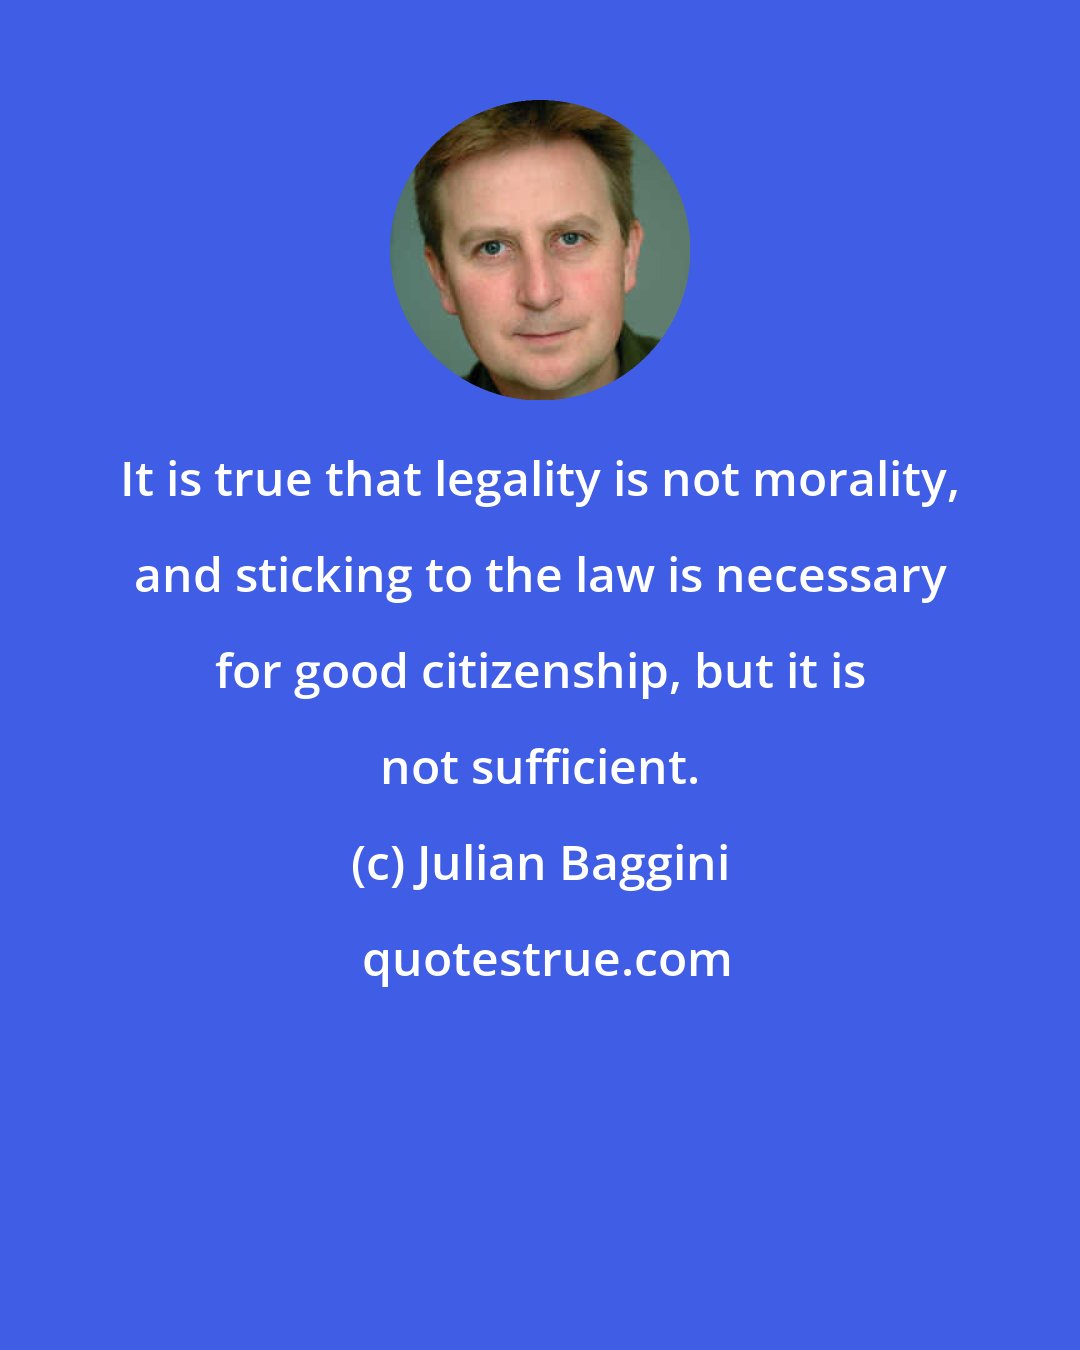 Julian Baggini: It is true that legality is not morality, and sticking to the law is necessary for good citizenship, but it is not sufficient.